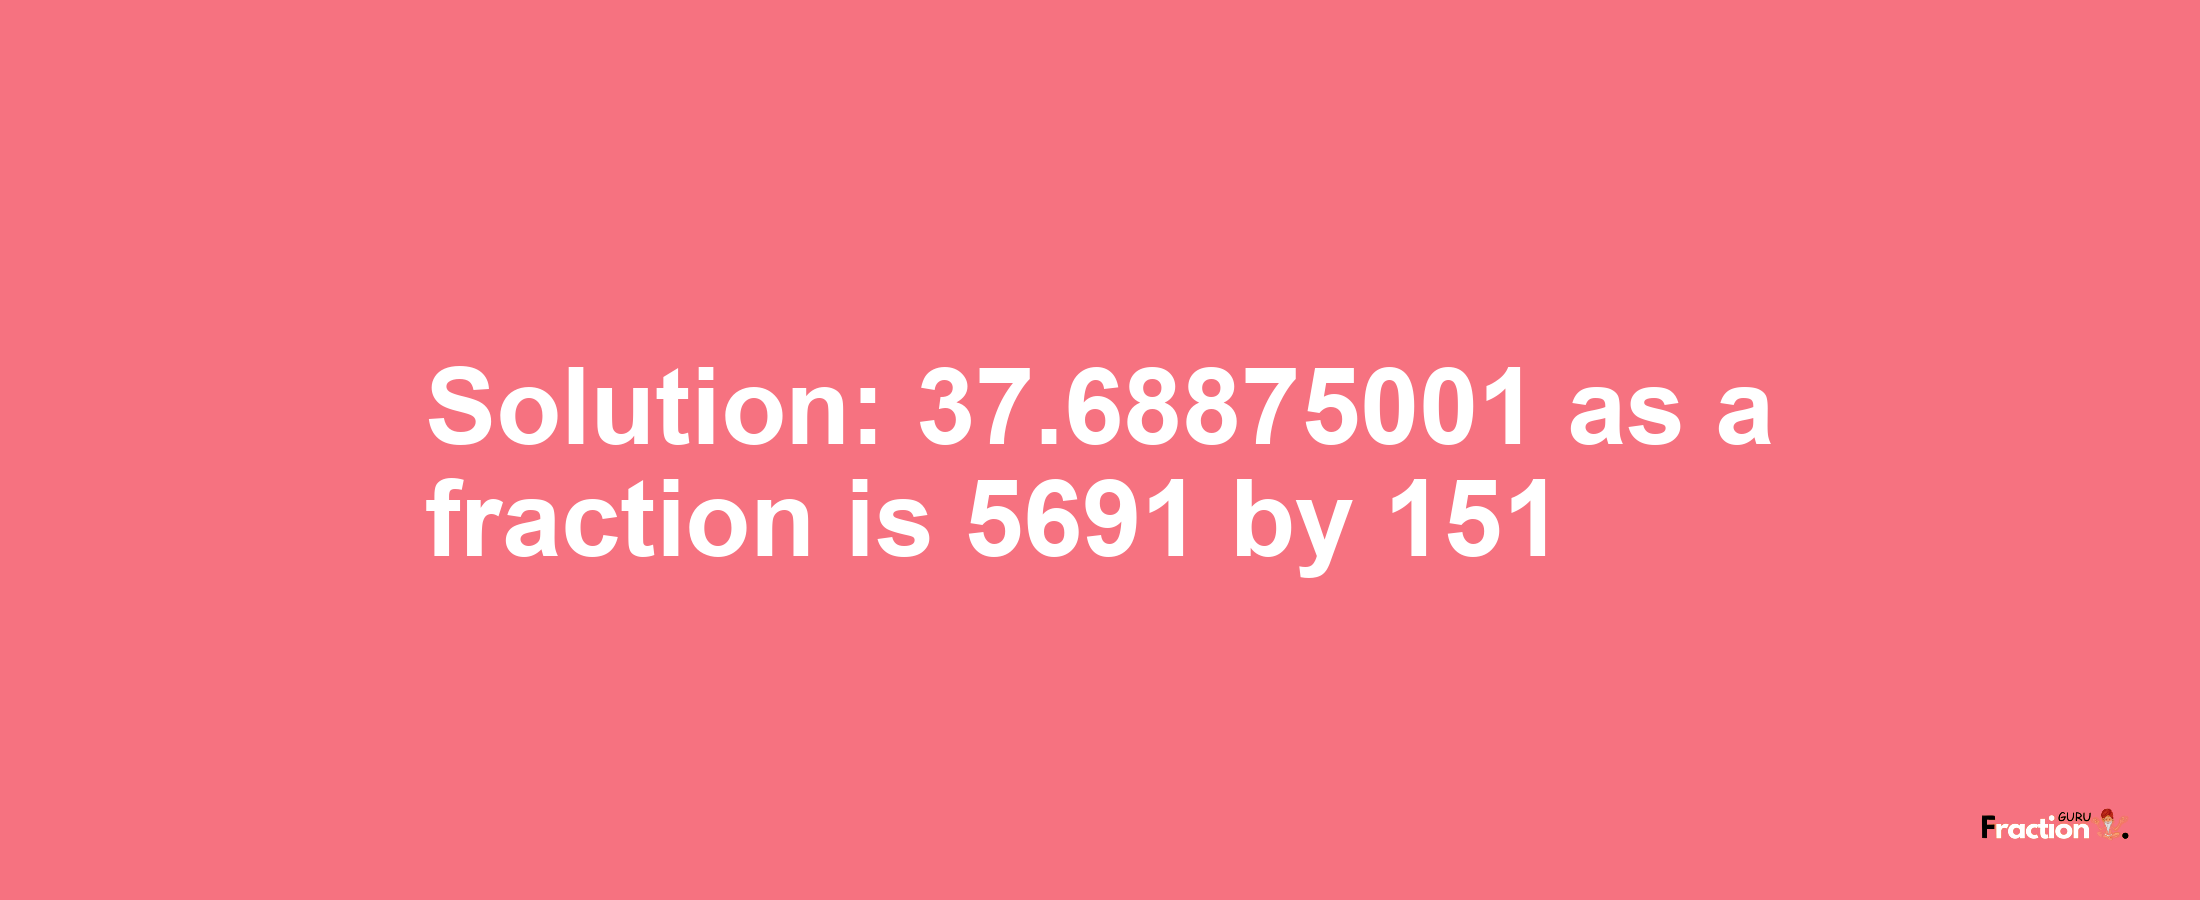 Solution:37.68875001 as a fraction is 5691/151